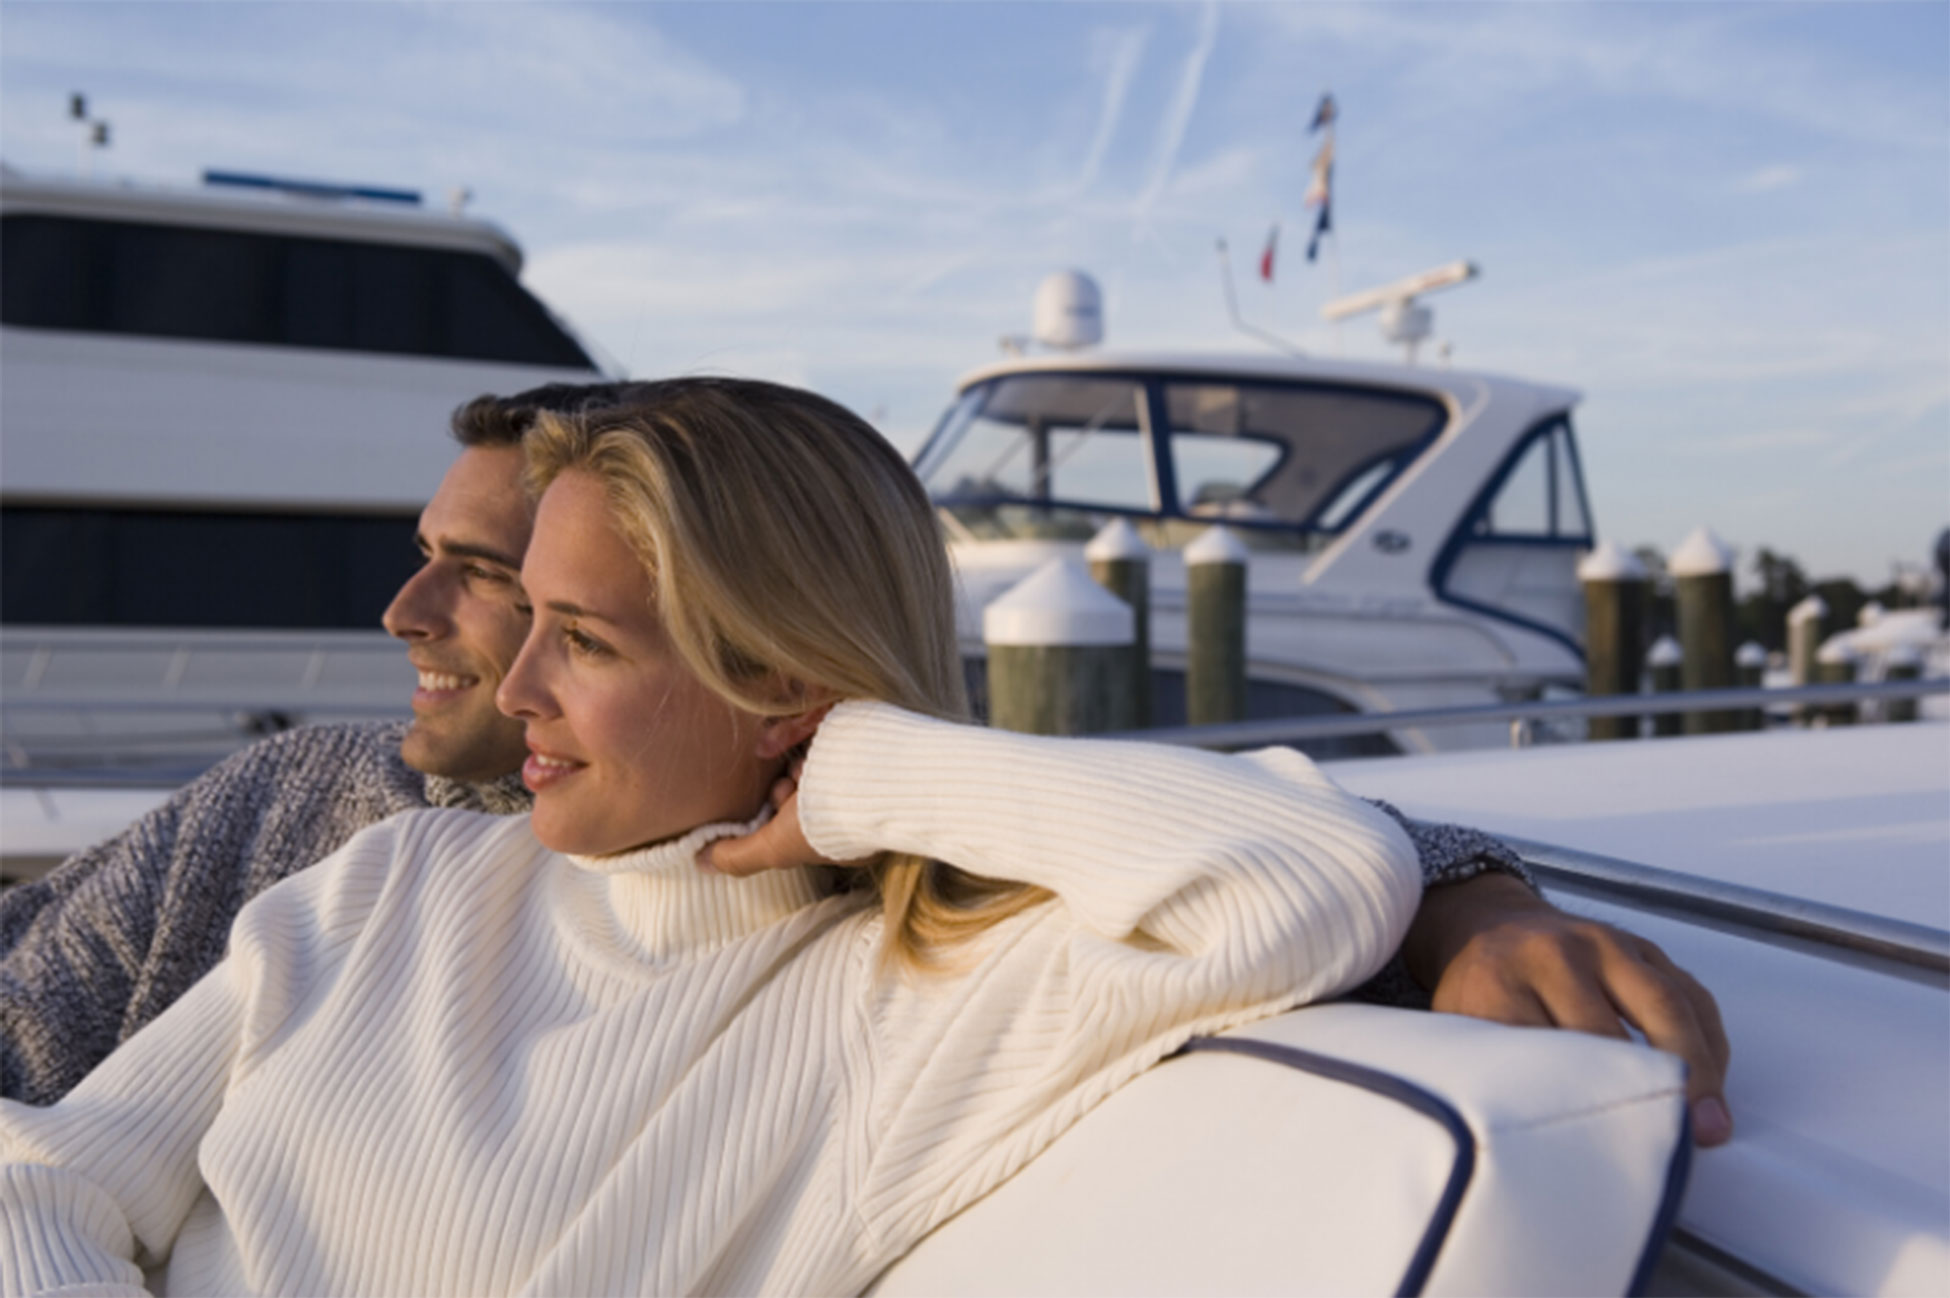 Sticker Shock At Miami Yacht Show? No worries Fractional Ownership by Saveene has you covered